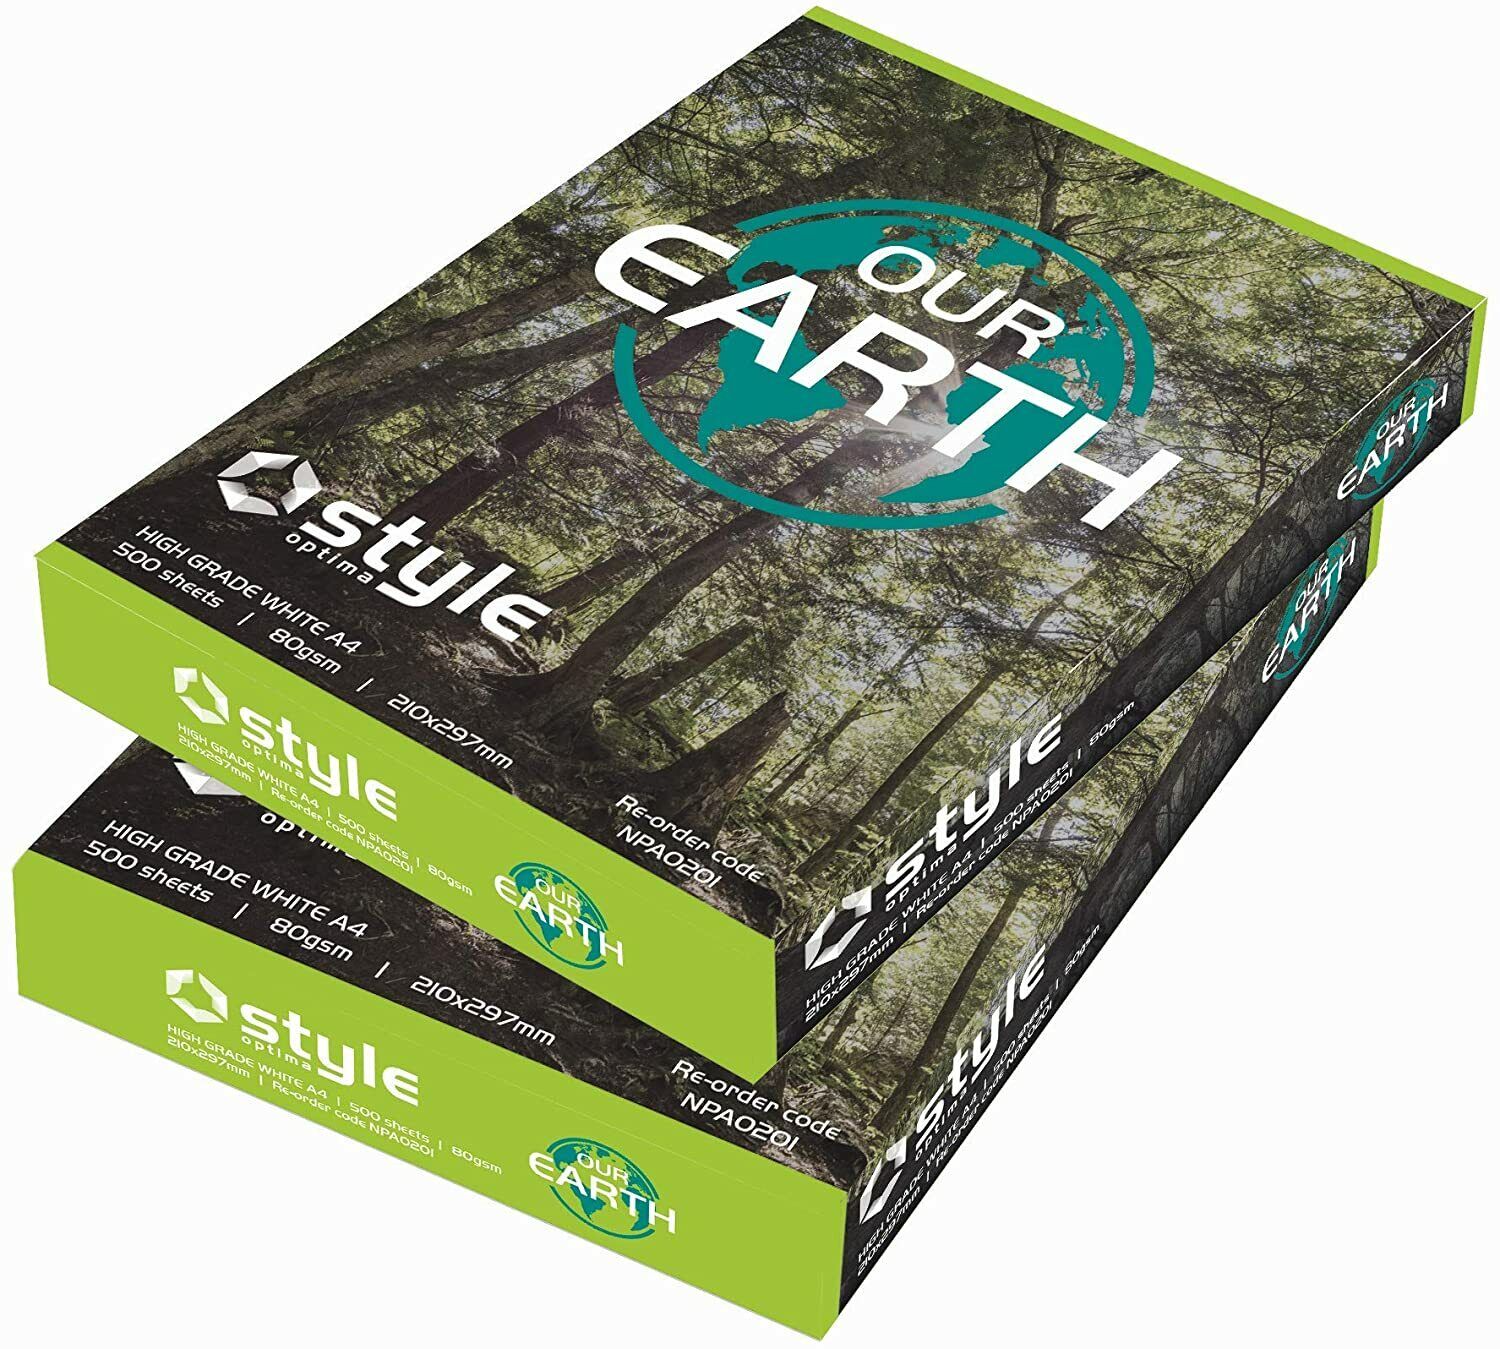 A4 OR A5 '80gsm' OUR EARTH SMOOTH WHITE PAPER. DURRELL WILDLIFE CONSERVATION. Nieuwe postorder